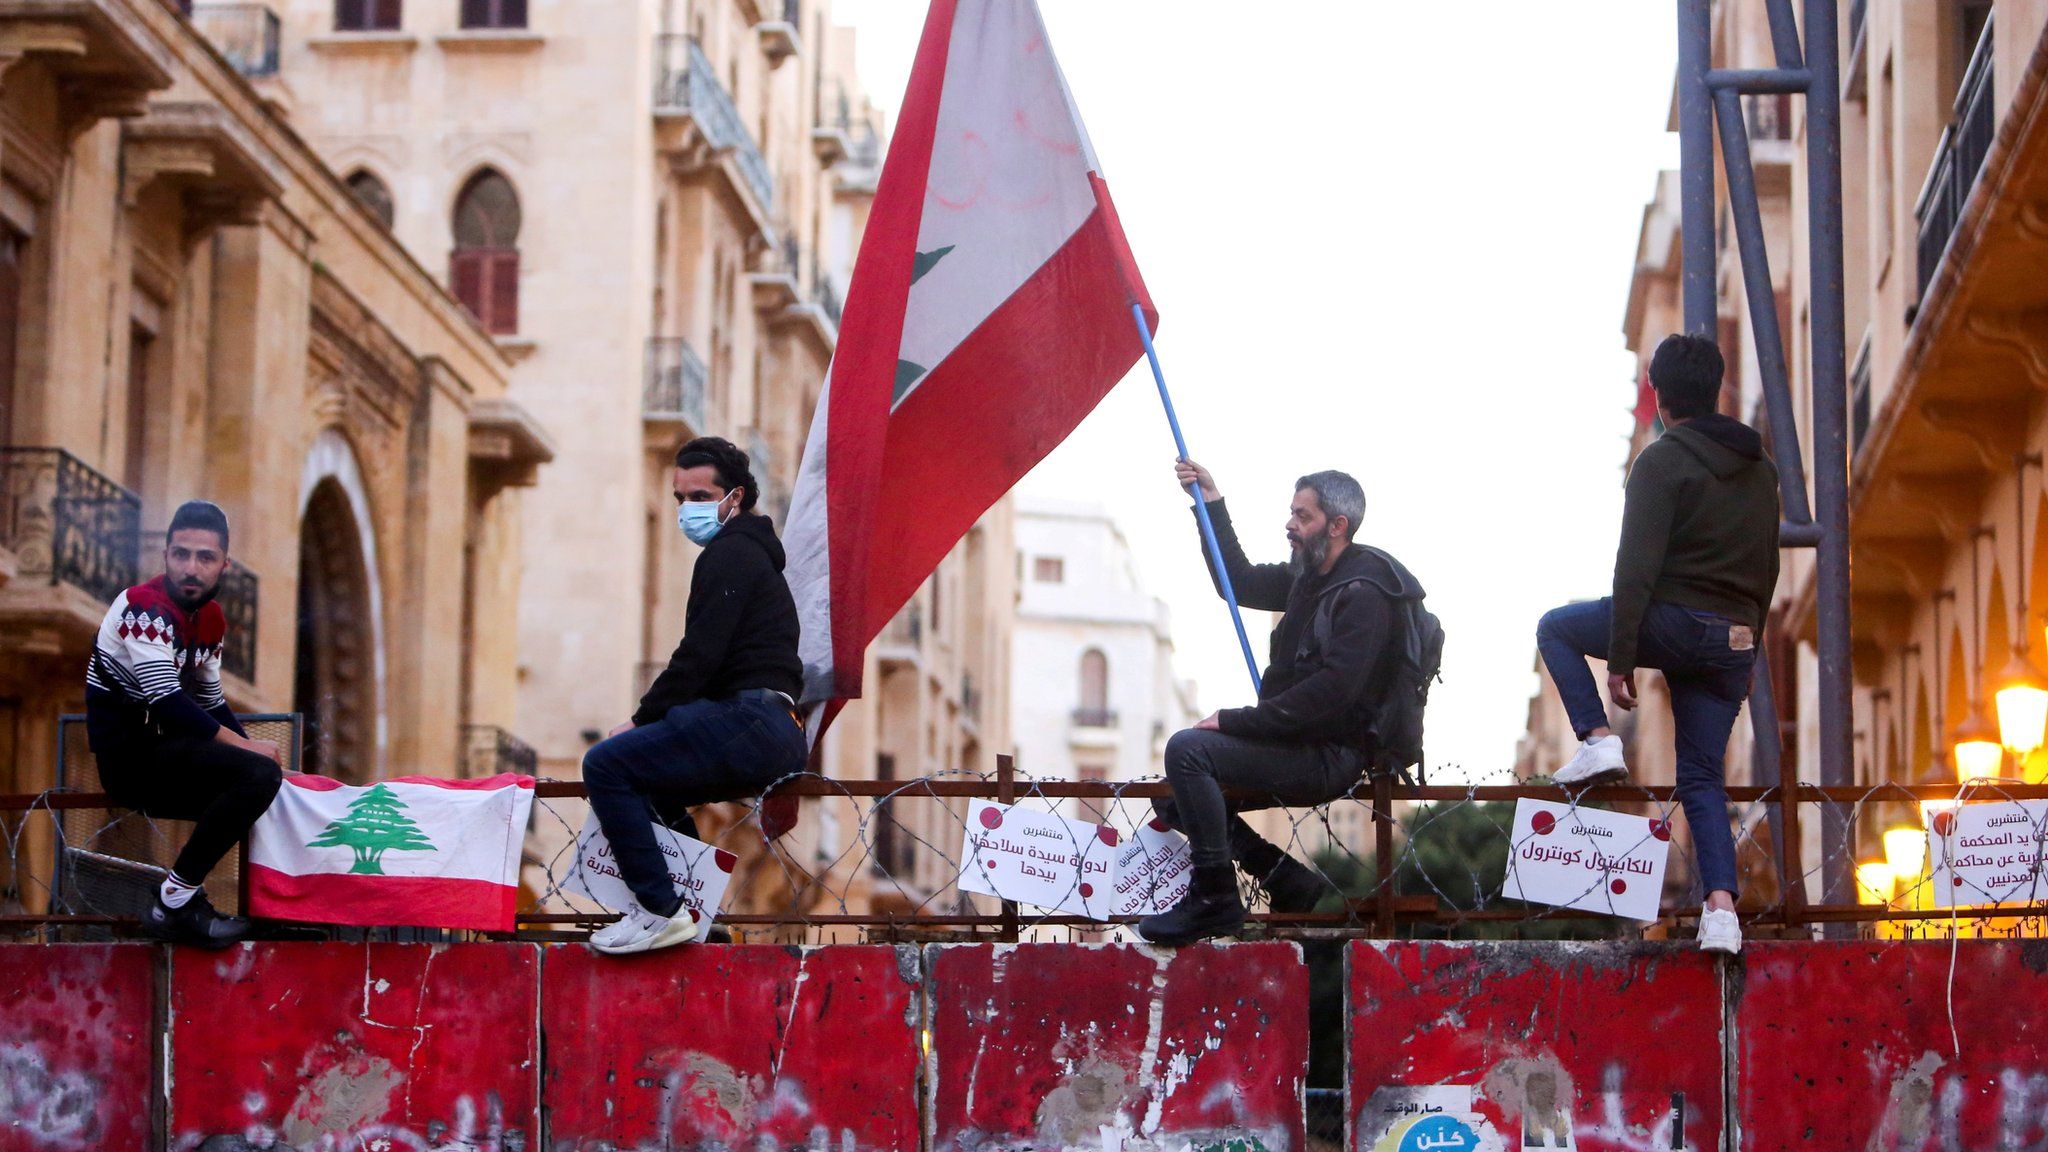 People protesting against Lebanon's political elite and the country's economic collapse in Beirut, Lebanon (12 March 2021)